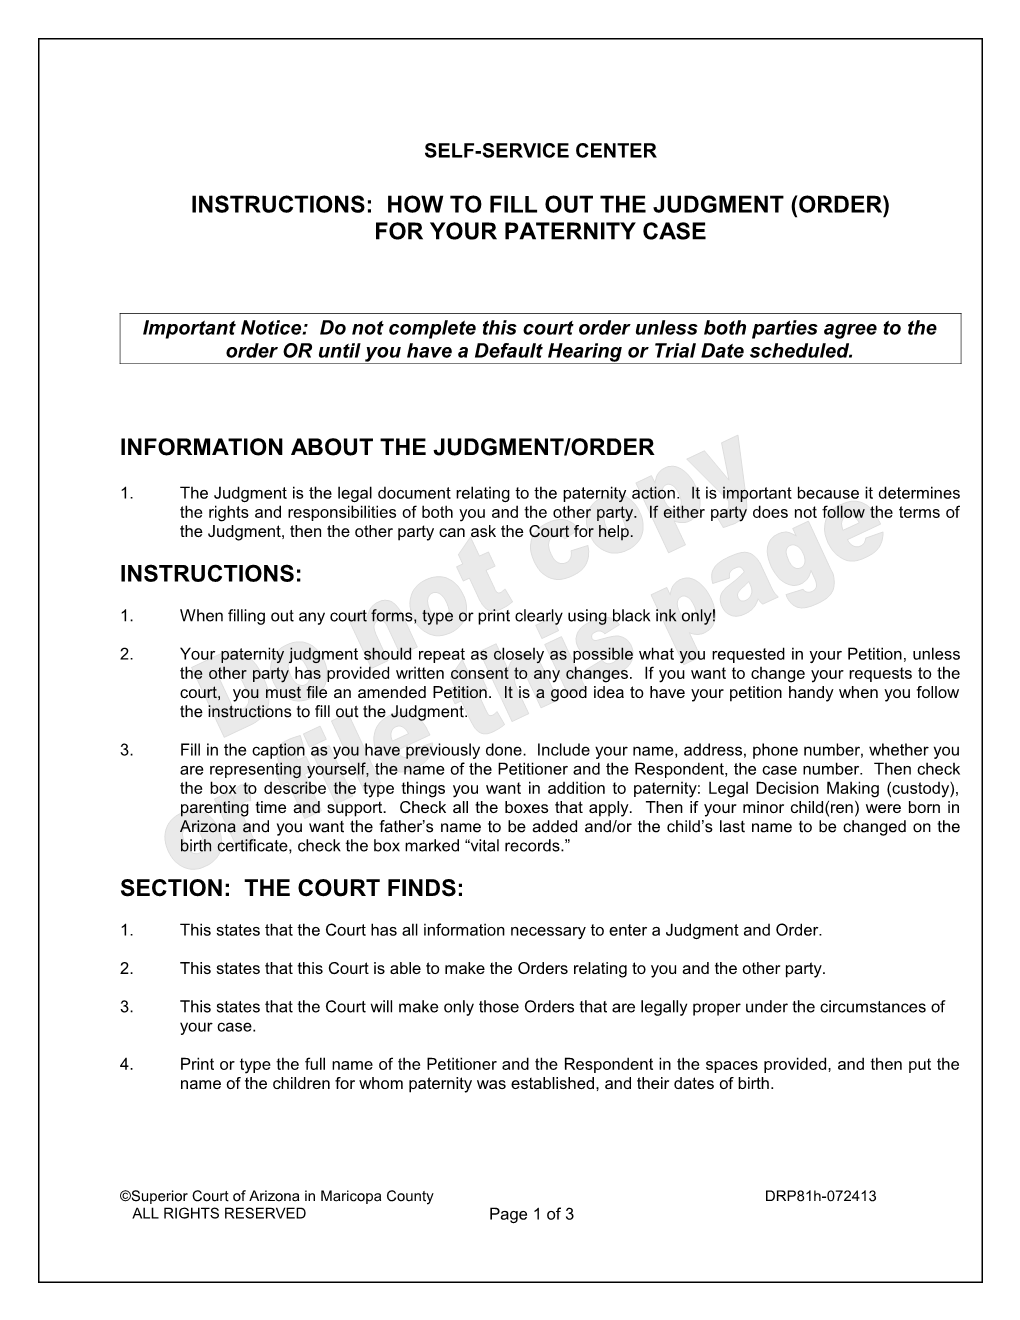 Instructions: How to Fill out the Judgment for Your Paternity Case